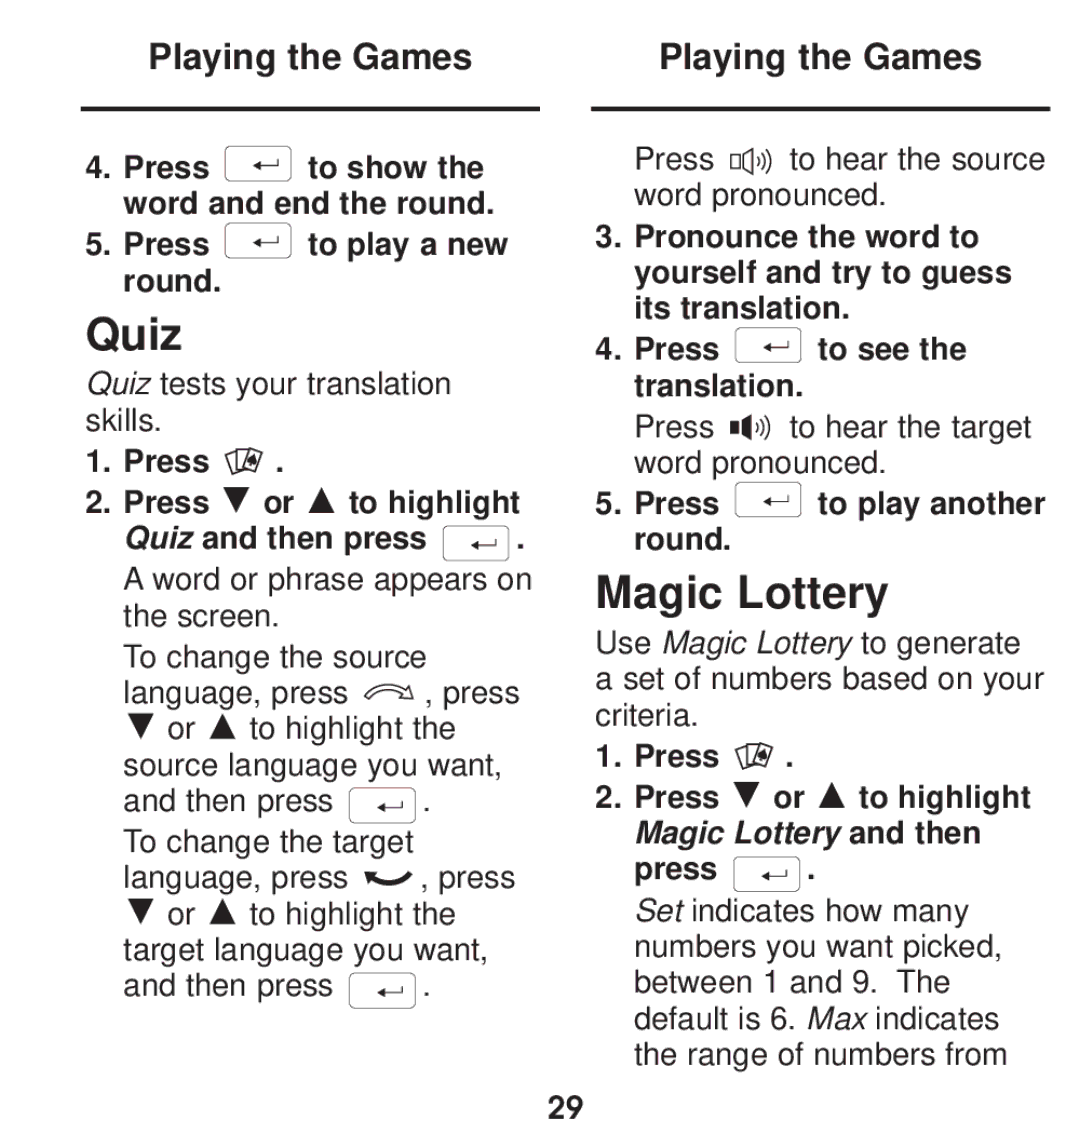 Franklin TGA-490 manual Quiz, Magic Lottery, Press to play a new round, Press to play another round 